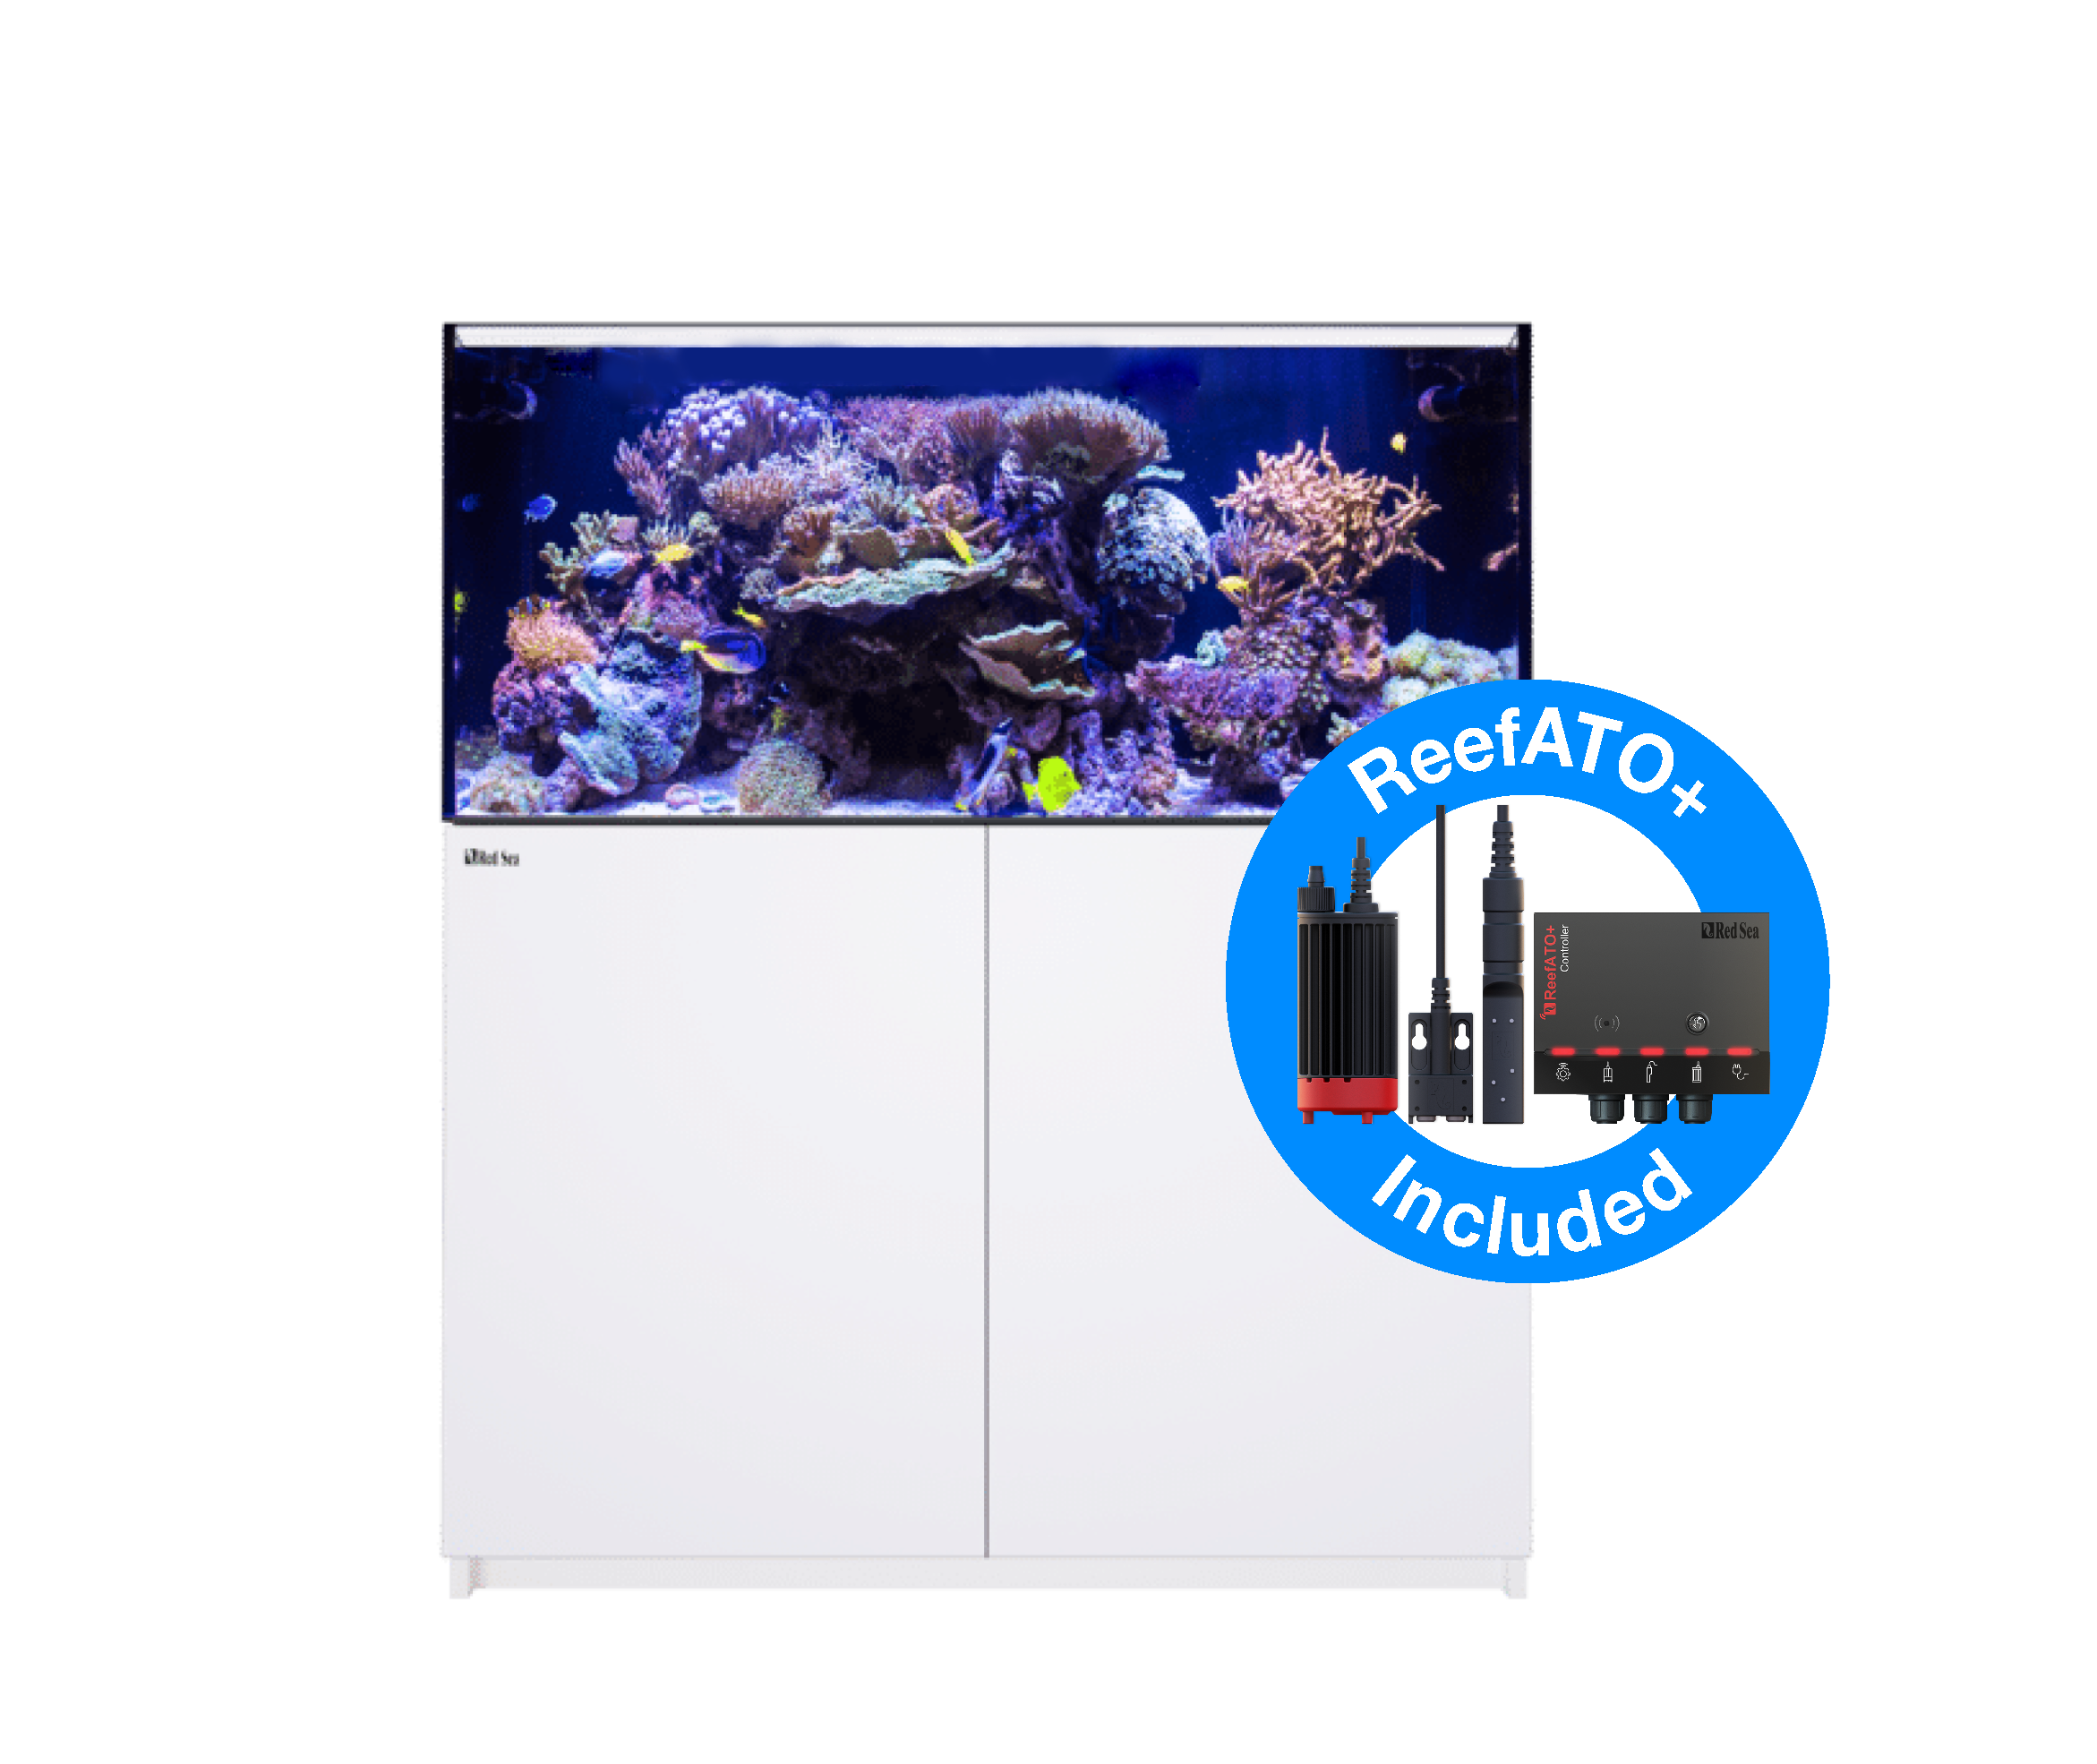 Red Sea Reefer G2+ XL 425 Deluxe Aquarium - White (2 x ReefLED 160s)